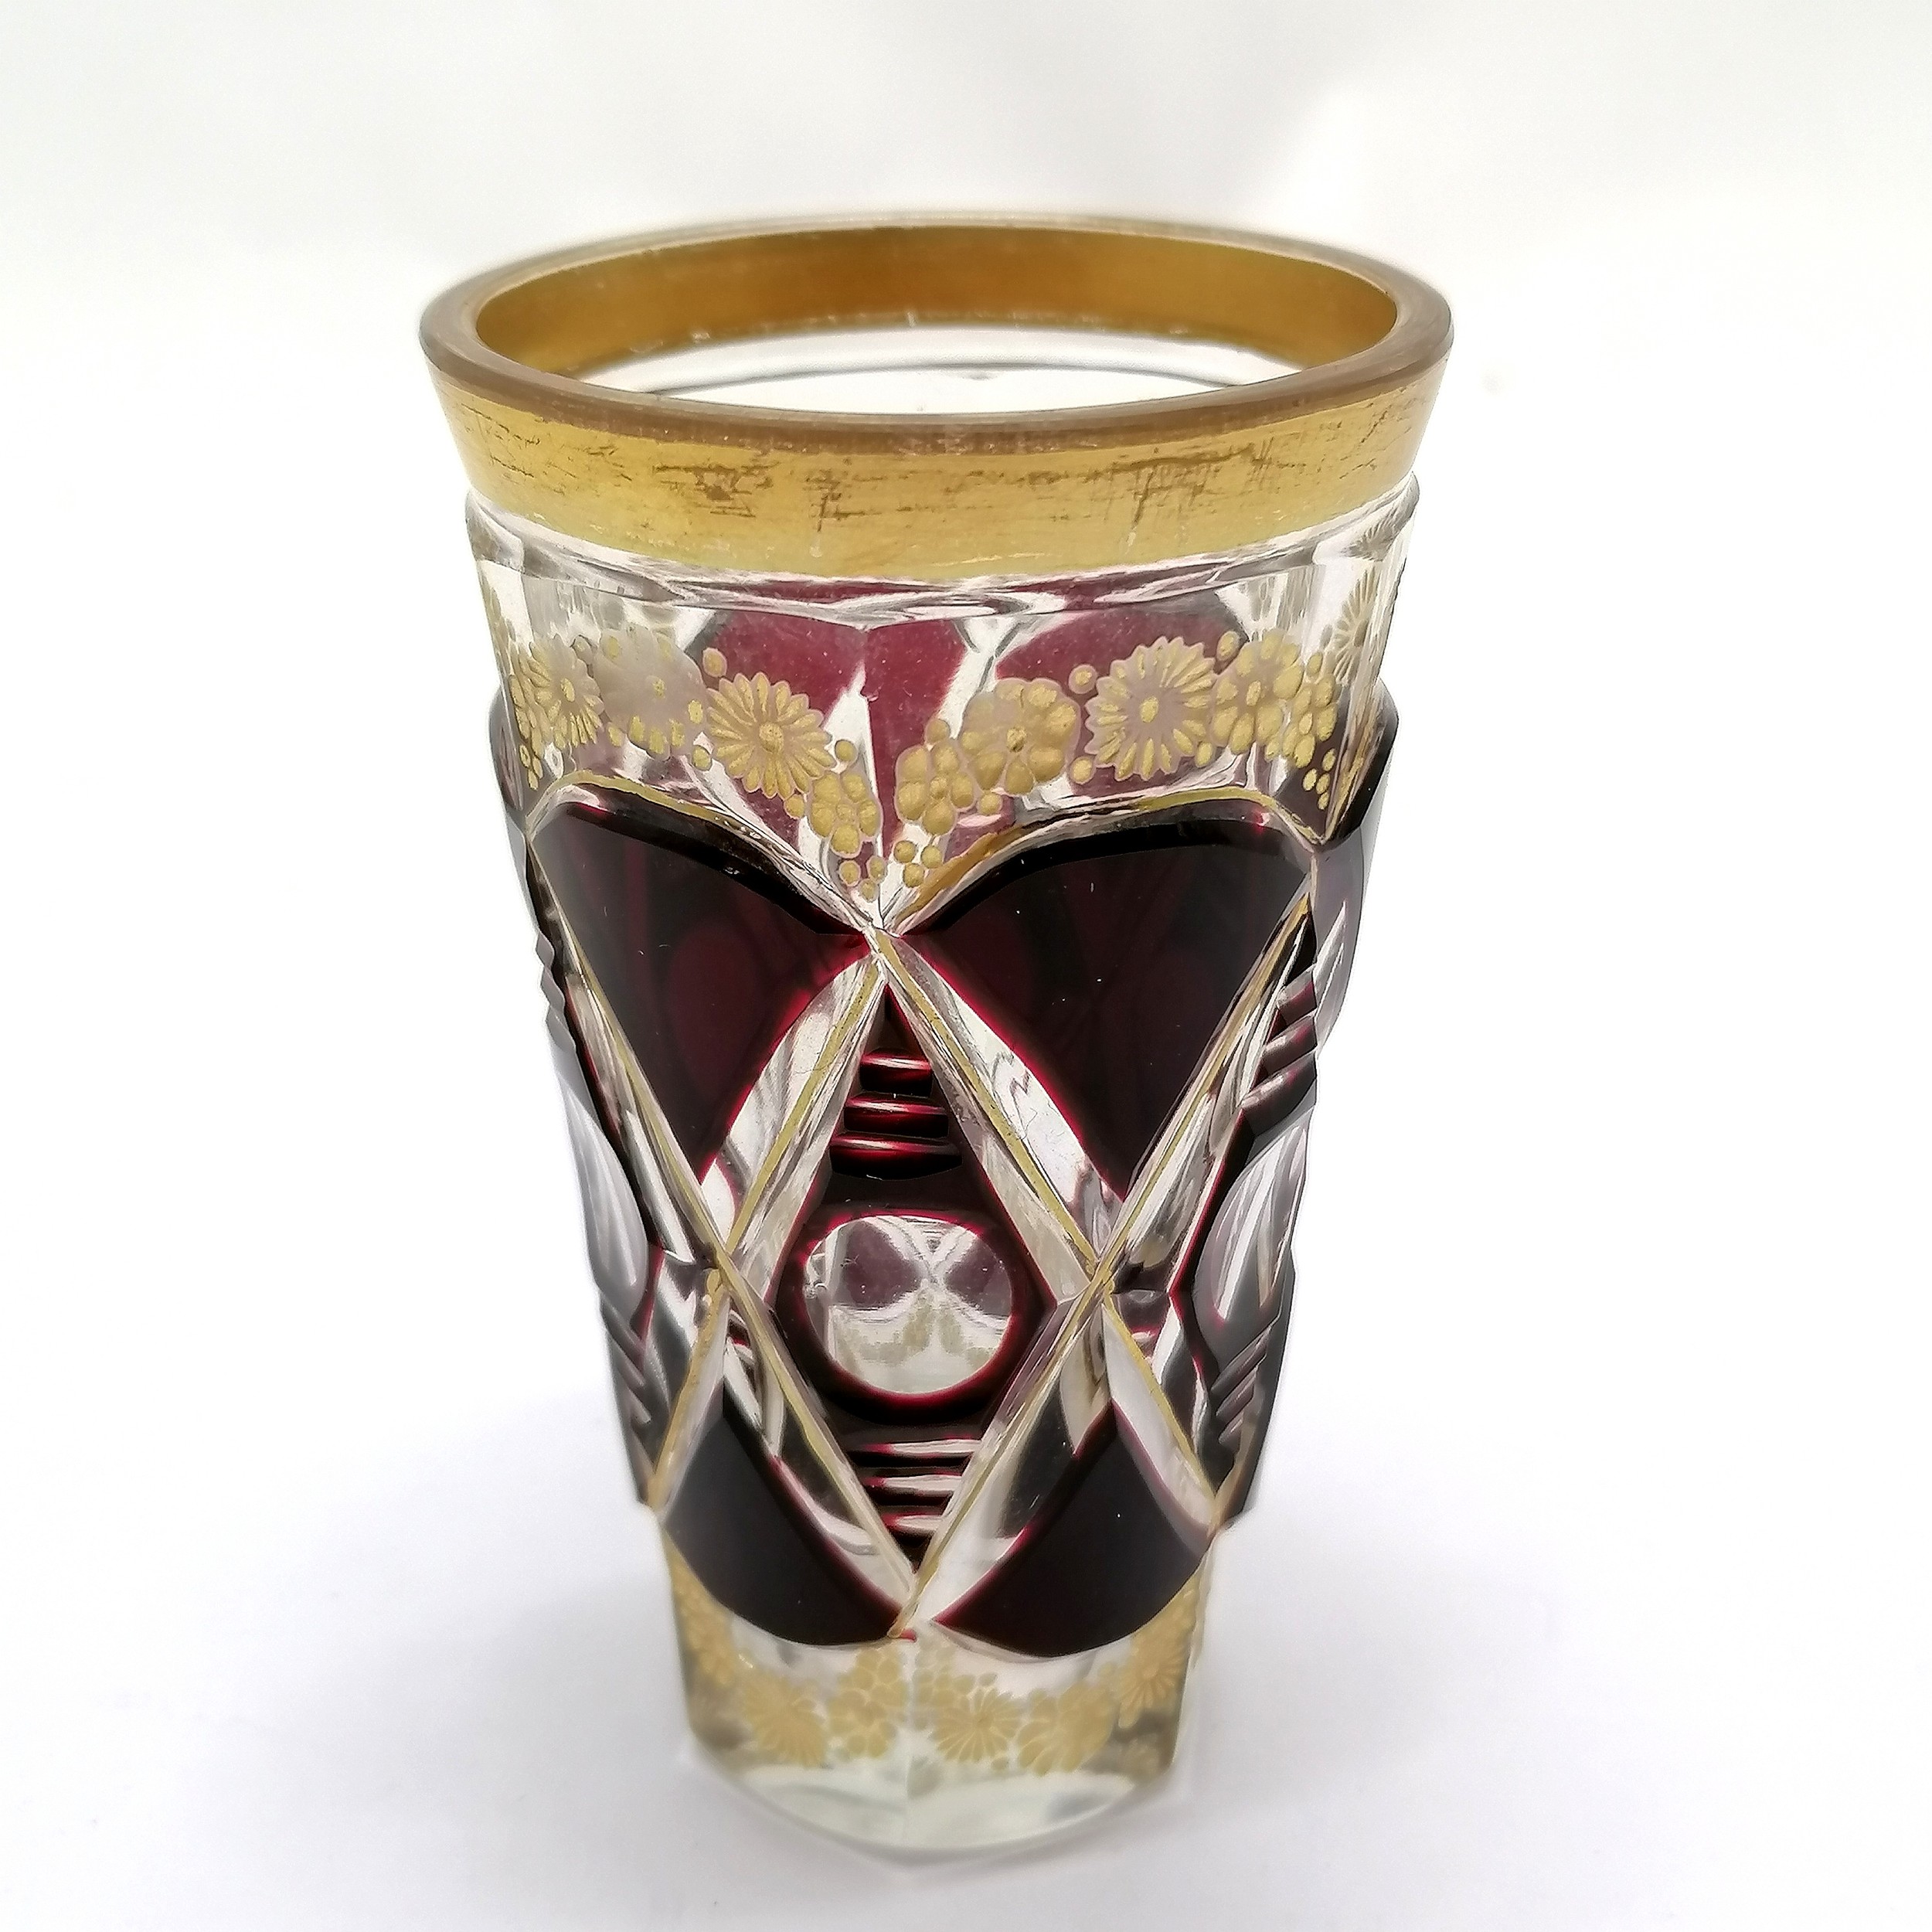 Antique Bohemian overlaid glass tumbler with ruby & gilded detail - 9cm high ~ slight wear to